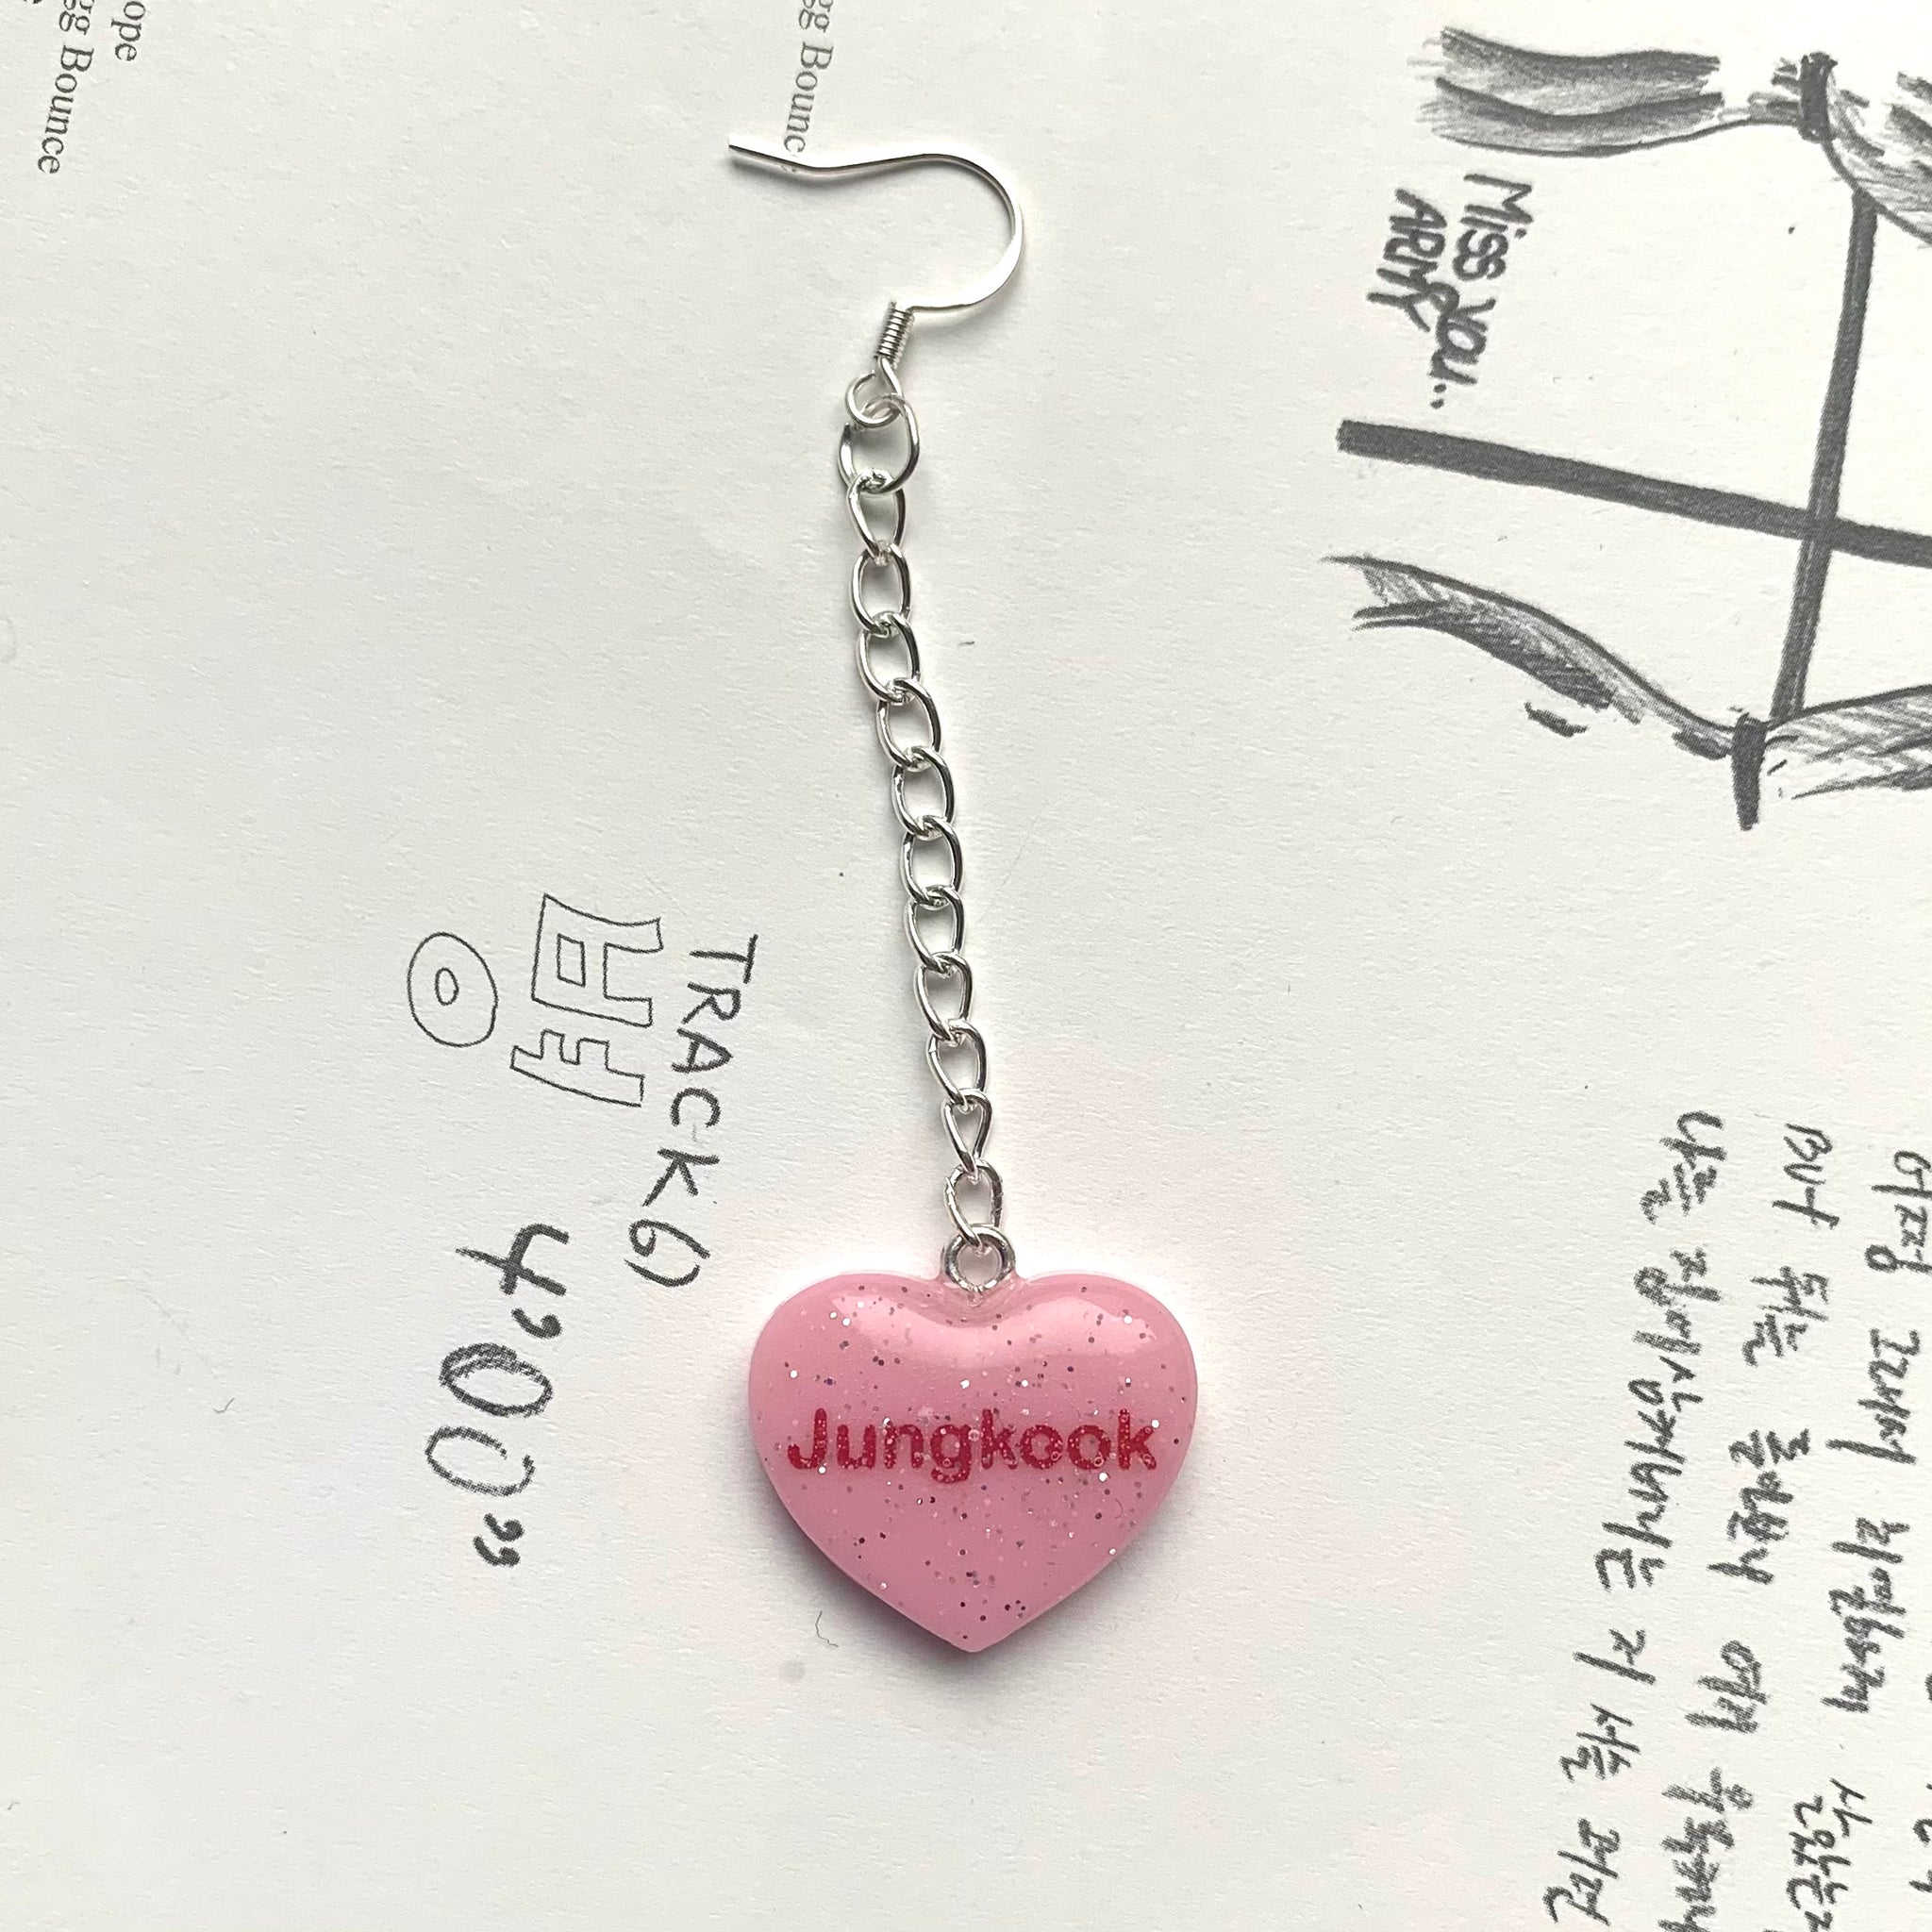 KPOP BTS LOGO necklace and earring set for bts army